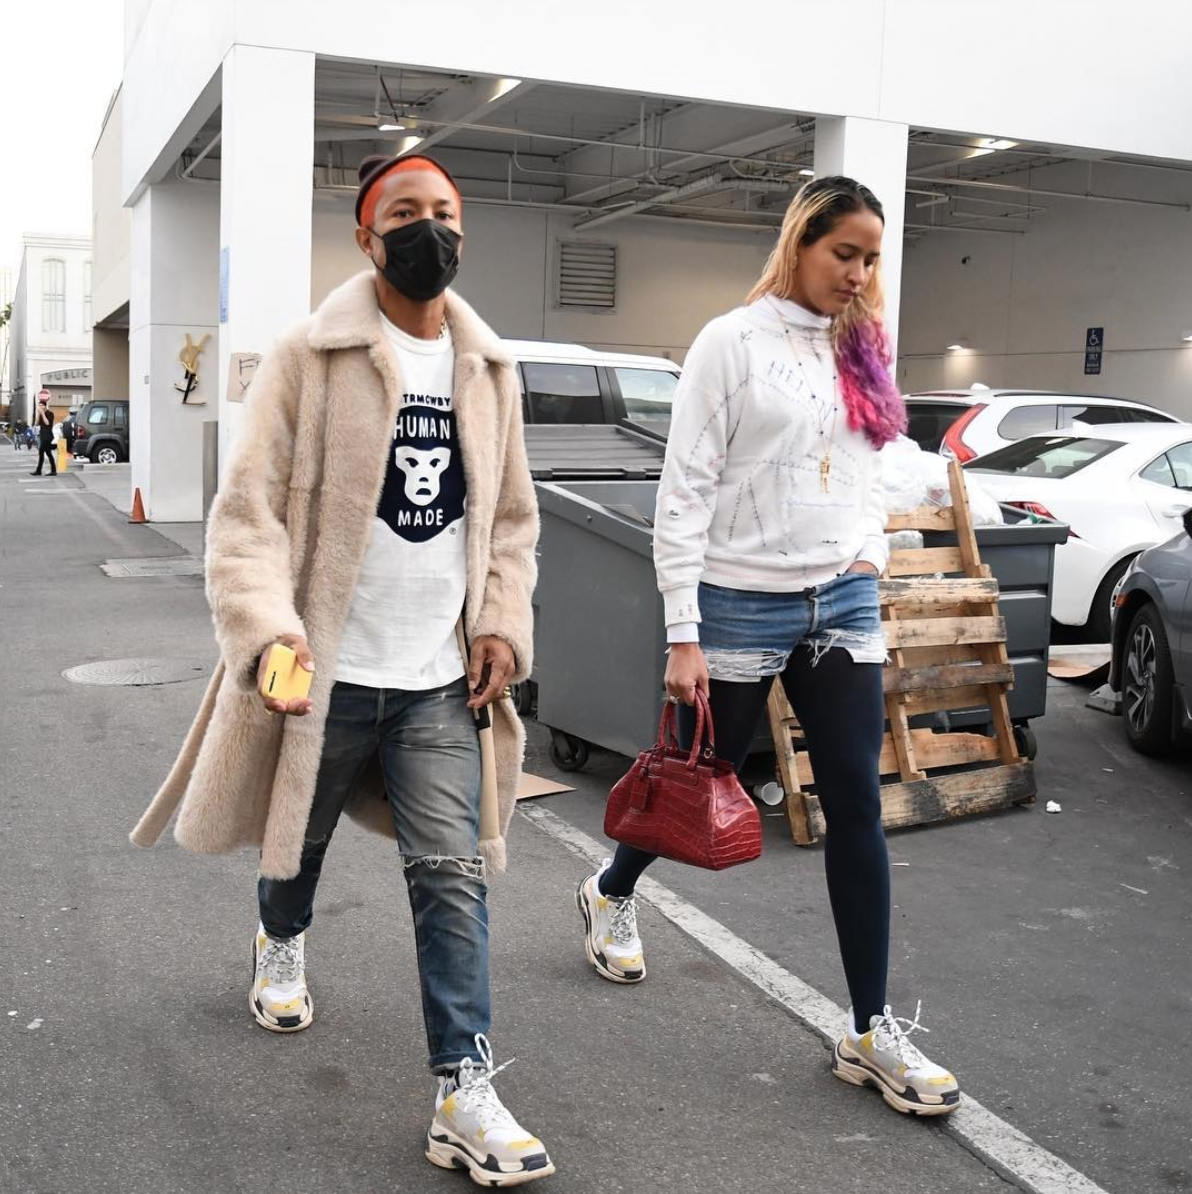 SPOTTED: Pharrell Williams Shopping In Celine Coat & Balenciaga Sneakers